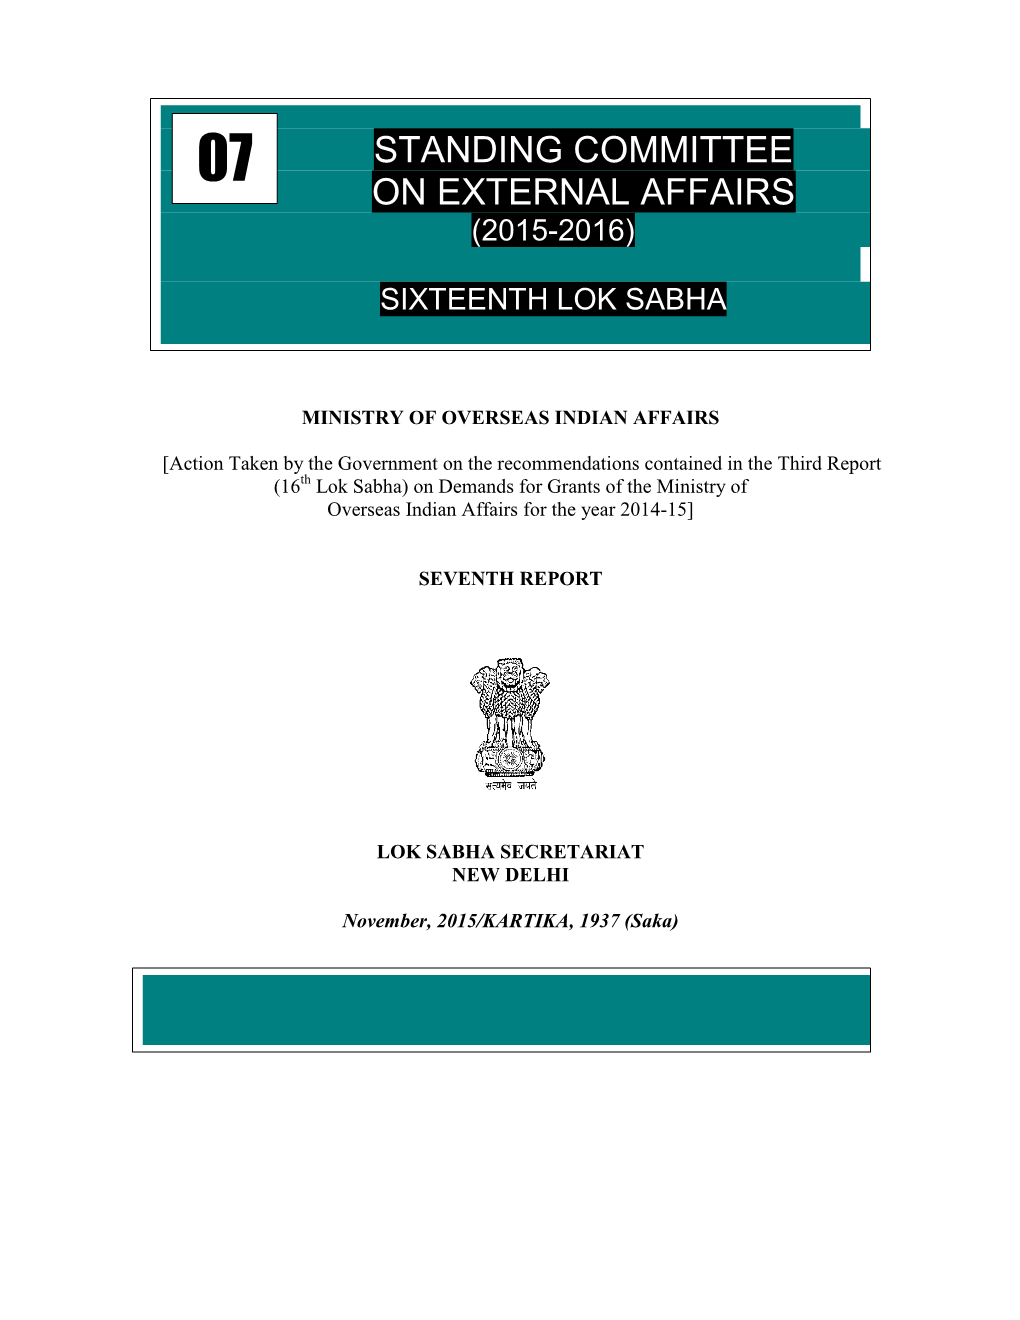 Standing Committee on External Affairs (2015-2016)